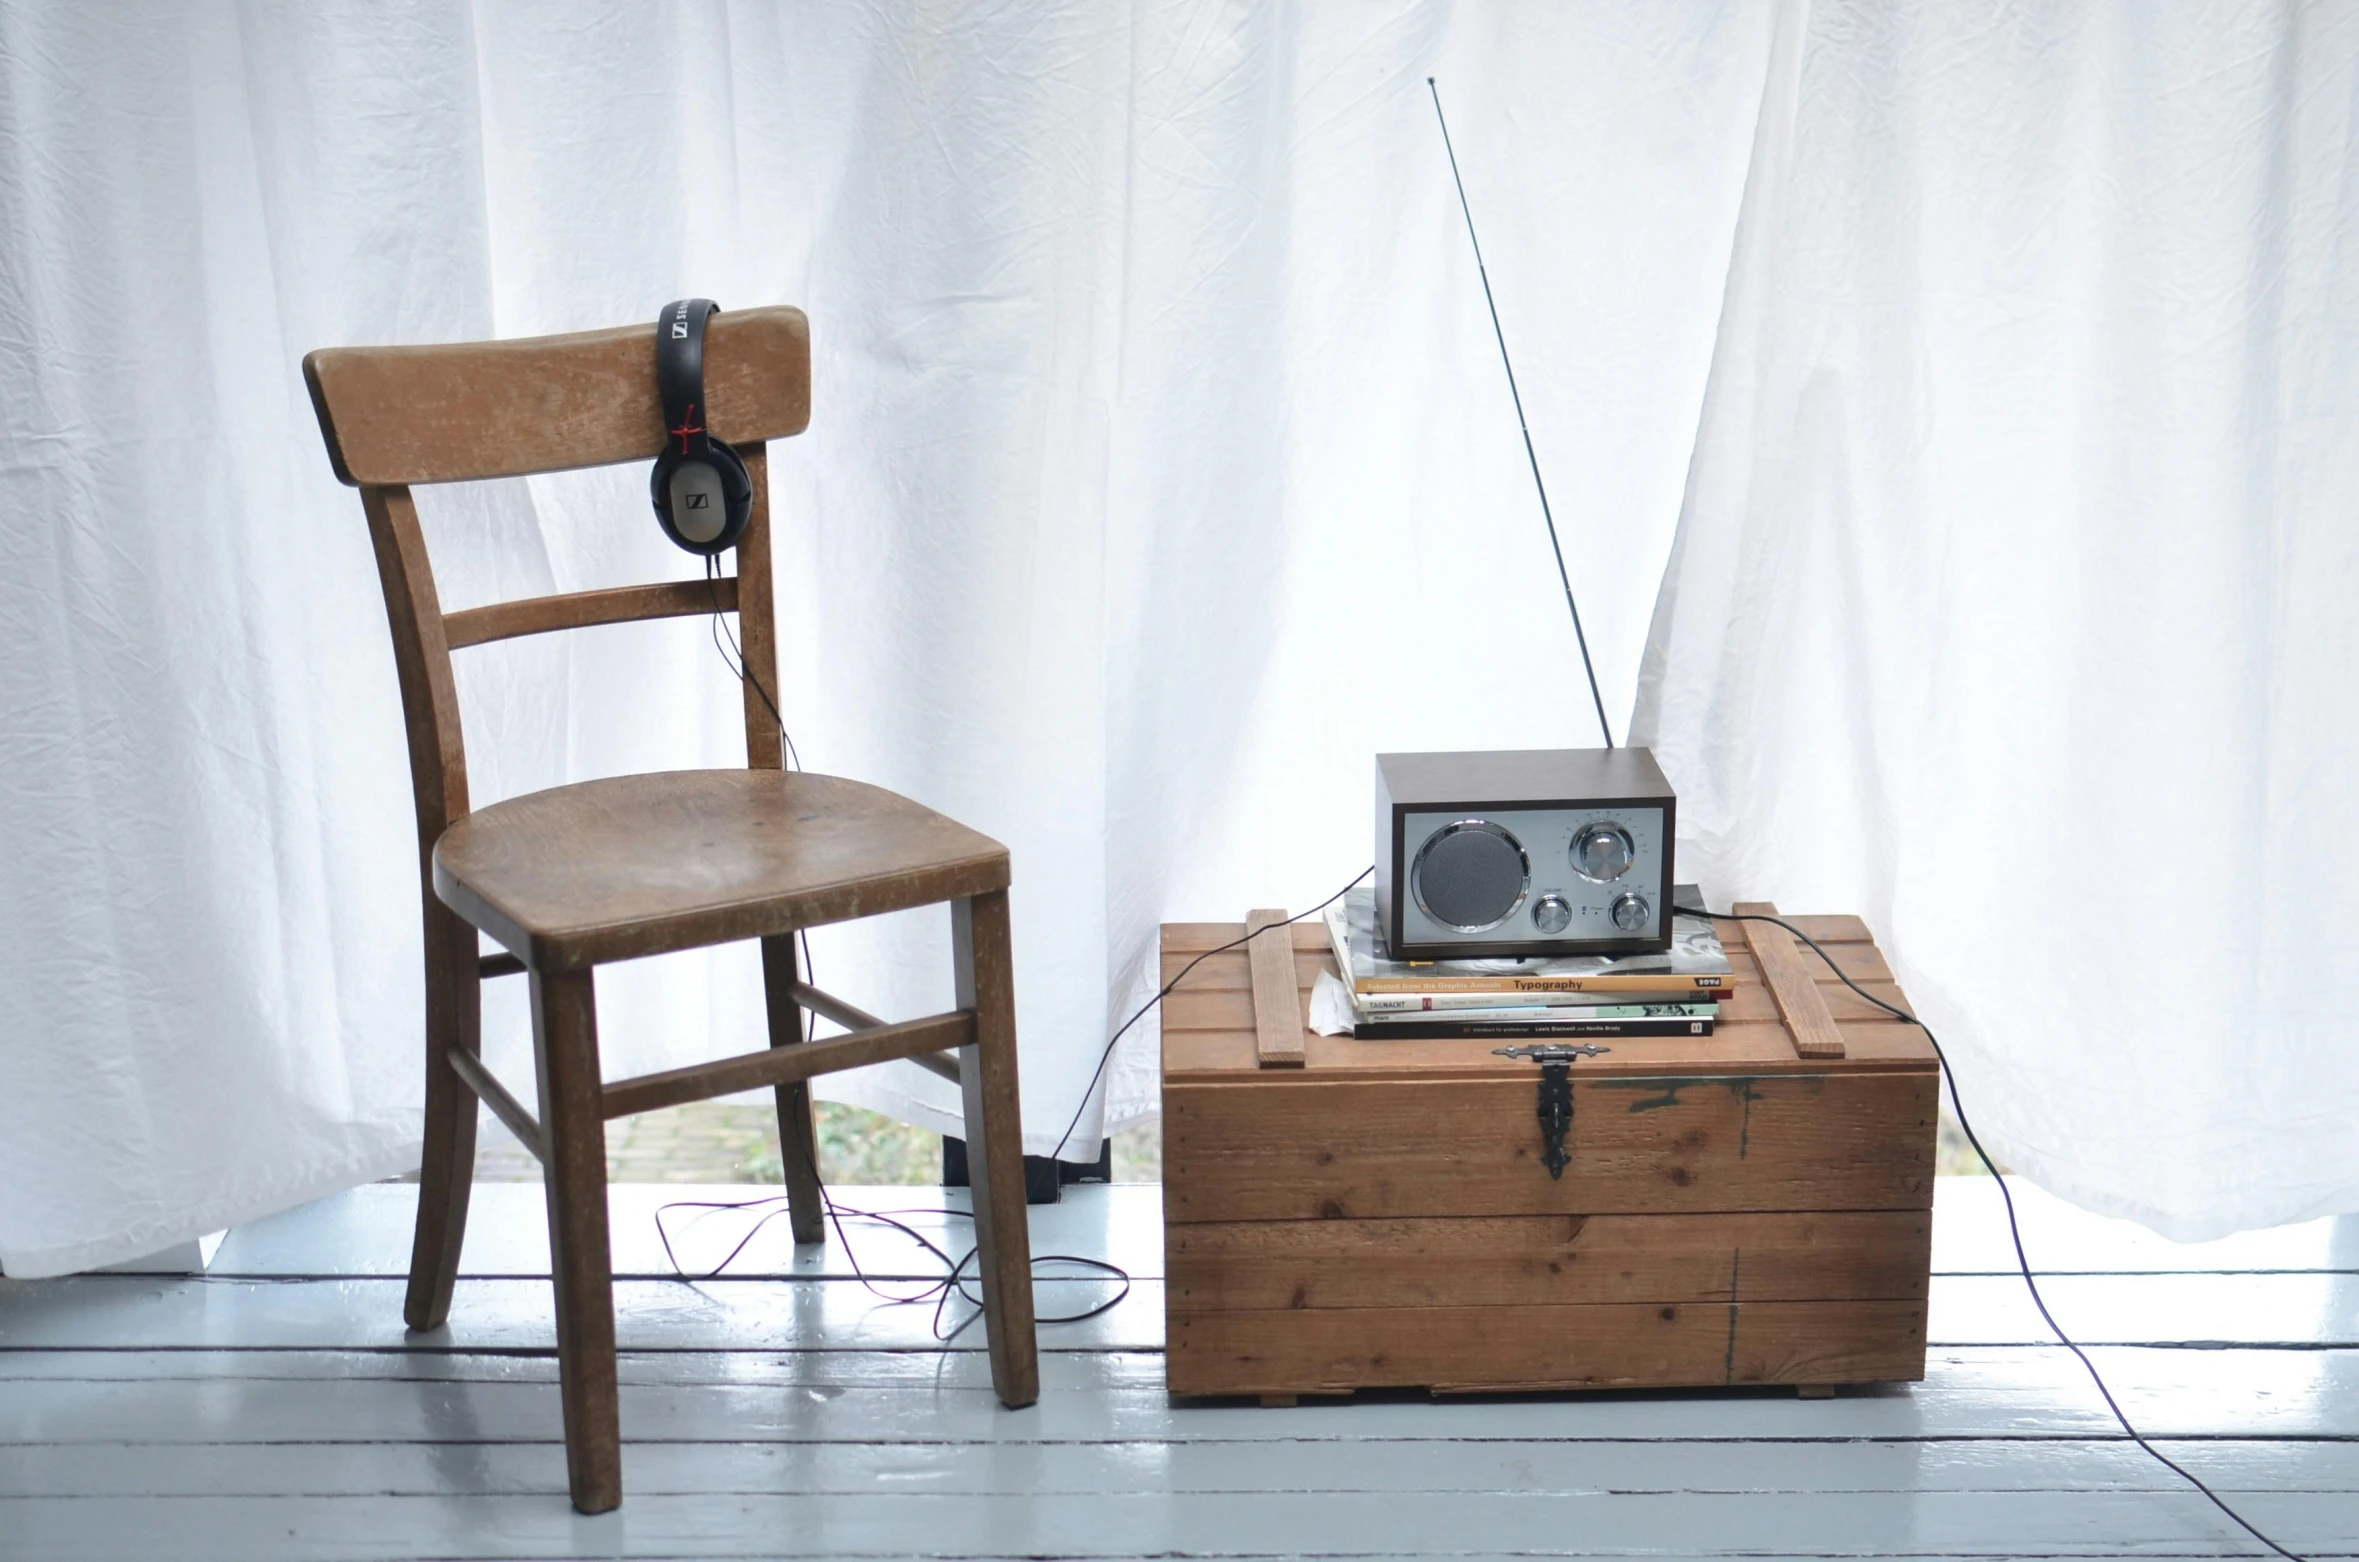 a radio sitting on top of a wooden box next to a chair, inspired by Joseph Beuys, arte povera, full body photograph, a quaint, white, shot on sony a 7